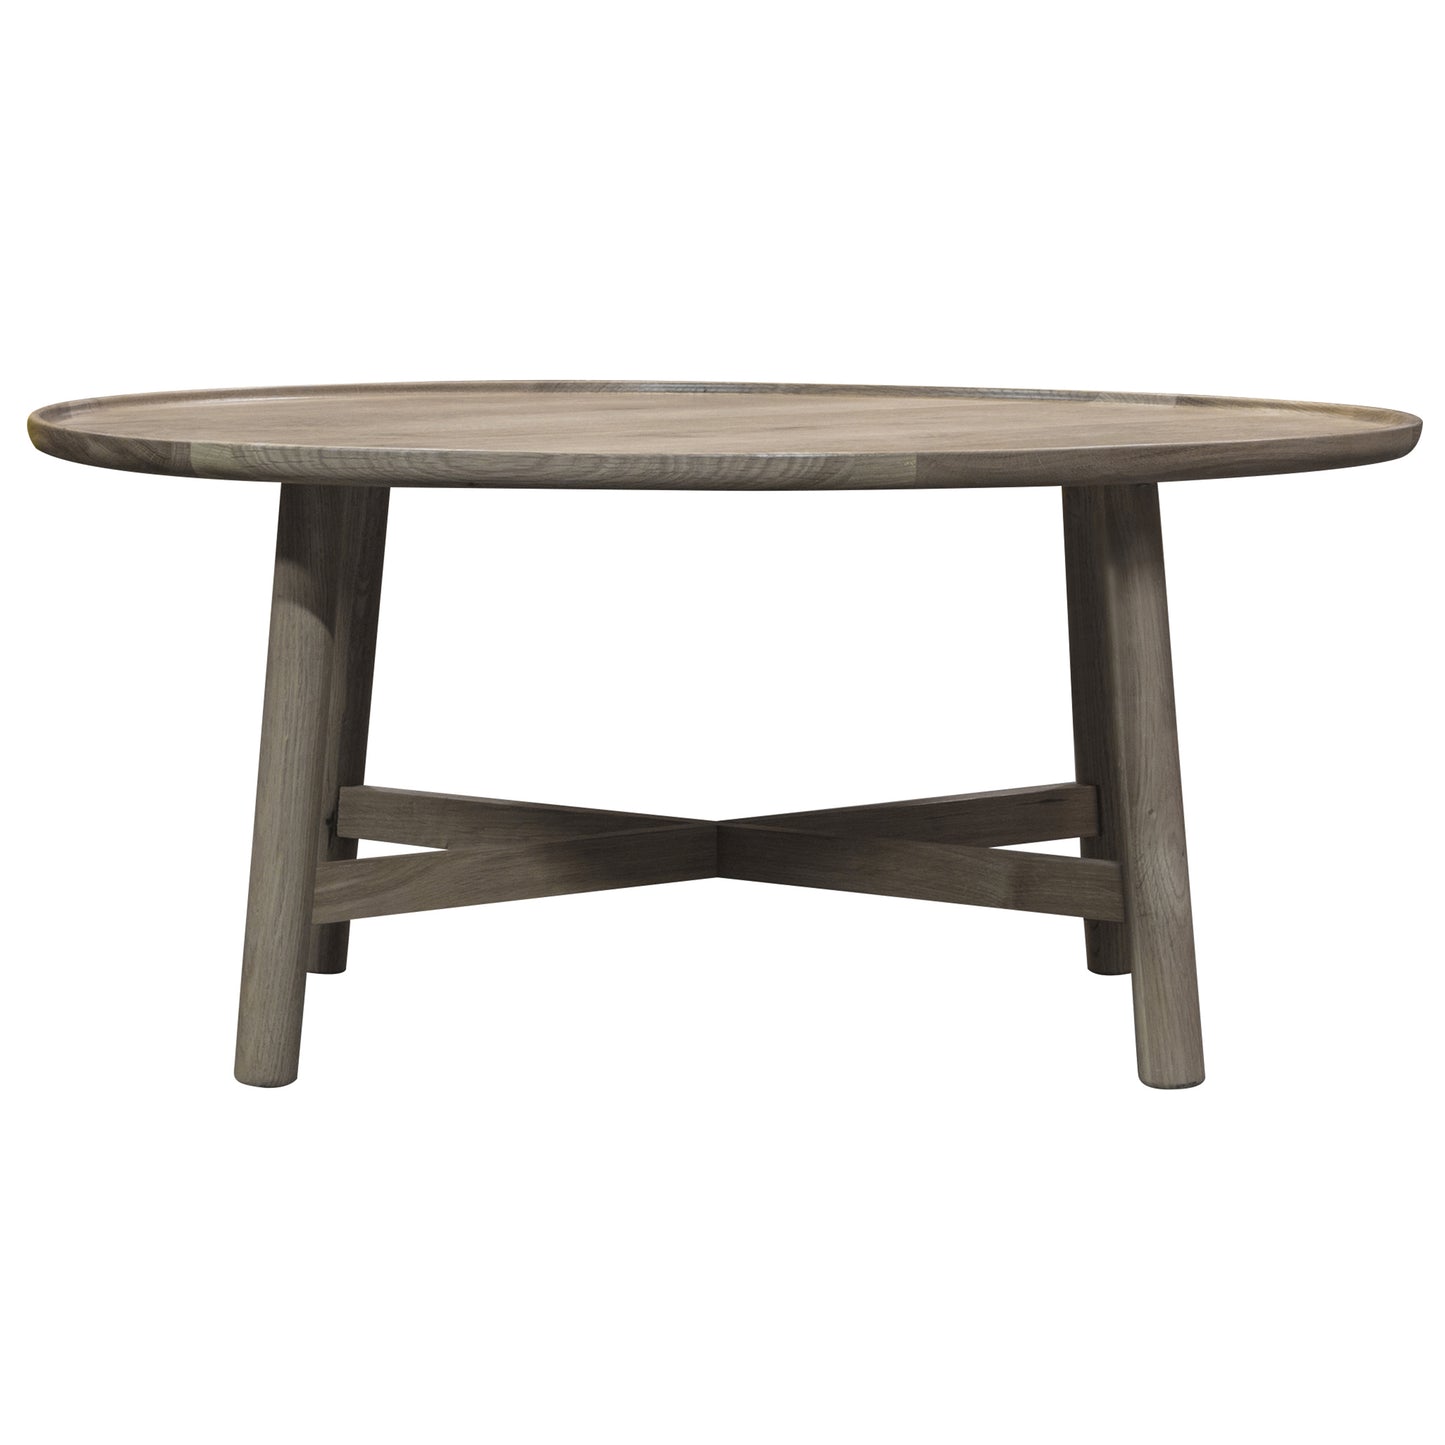 A stylish Wembury Round Coffee Table Grey with a wooden top, perfect for interior decor and home furniture.